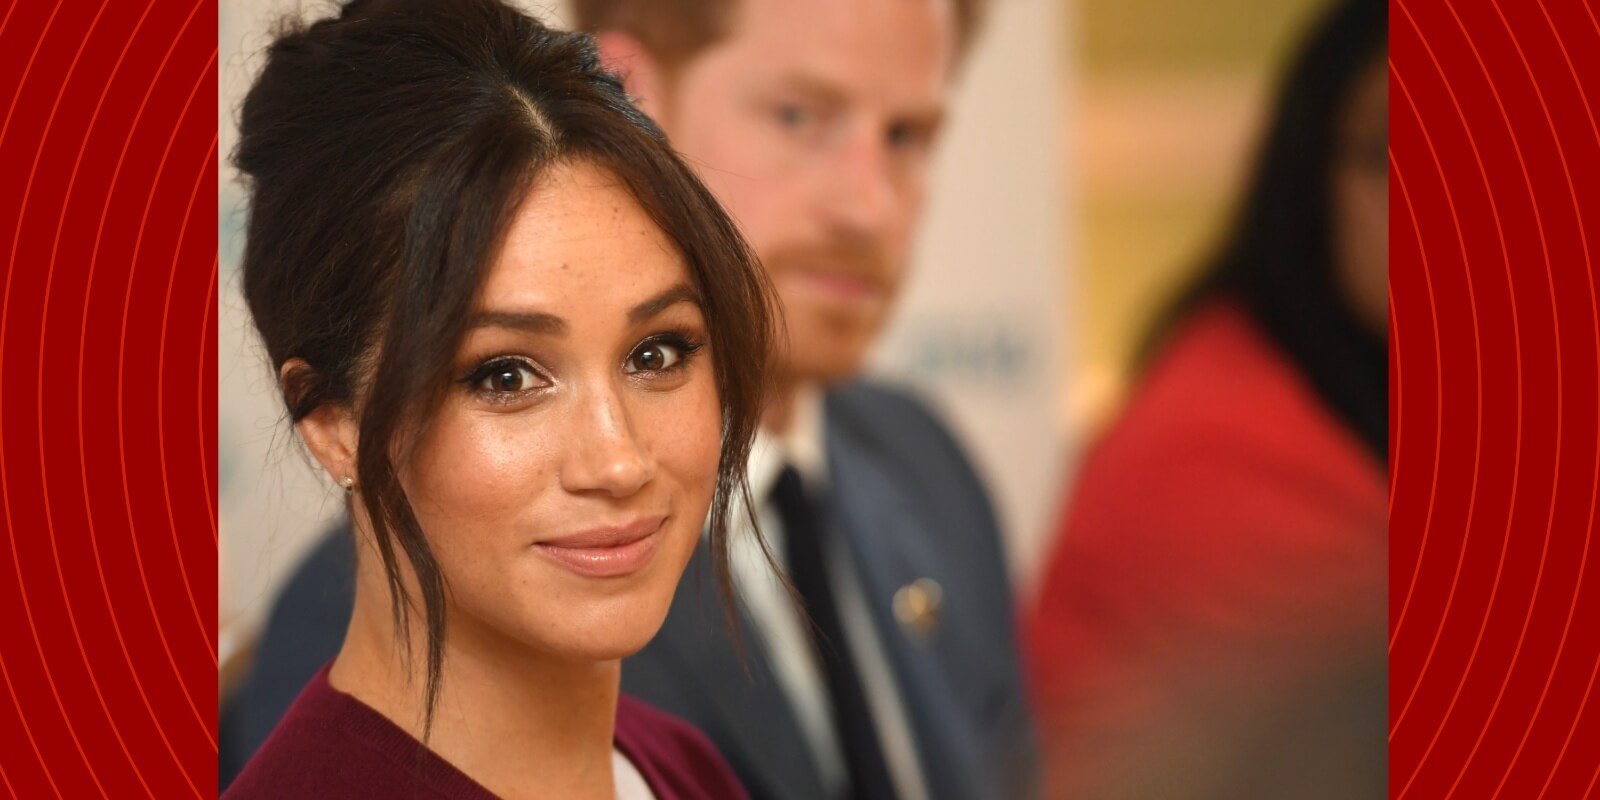 Meghan Markle and Prince Harry at a roundtable discussion on gender equality with The Queens Commonwealth Trust (QCT) and One Young World at Windsor Castle on October 25, 2019 in Windsor, England.